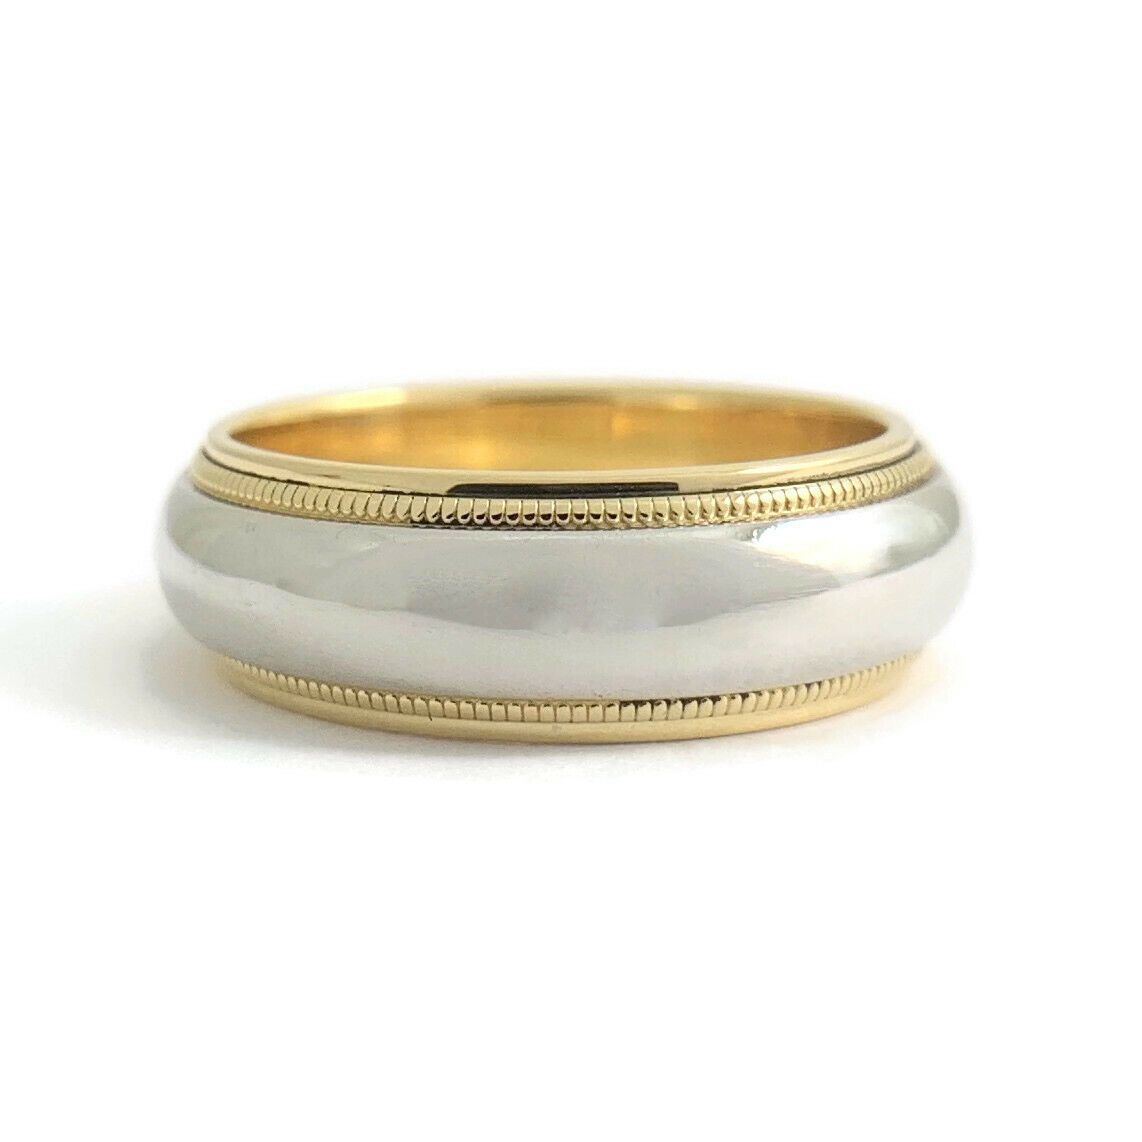 Primary image for Tiffany & Co Two-Tone Wedding Band Ring Platinum 18K Yellow Gold, 8.58 Grams